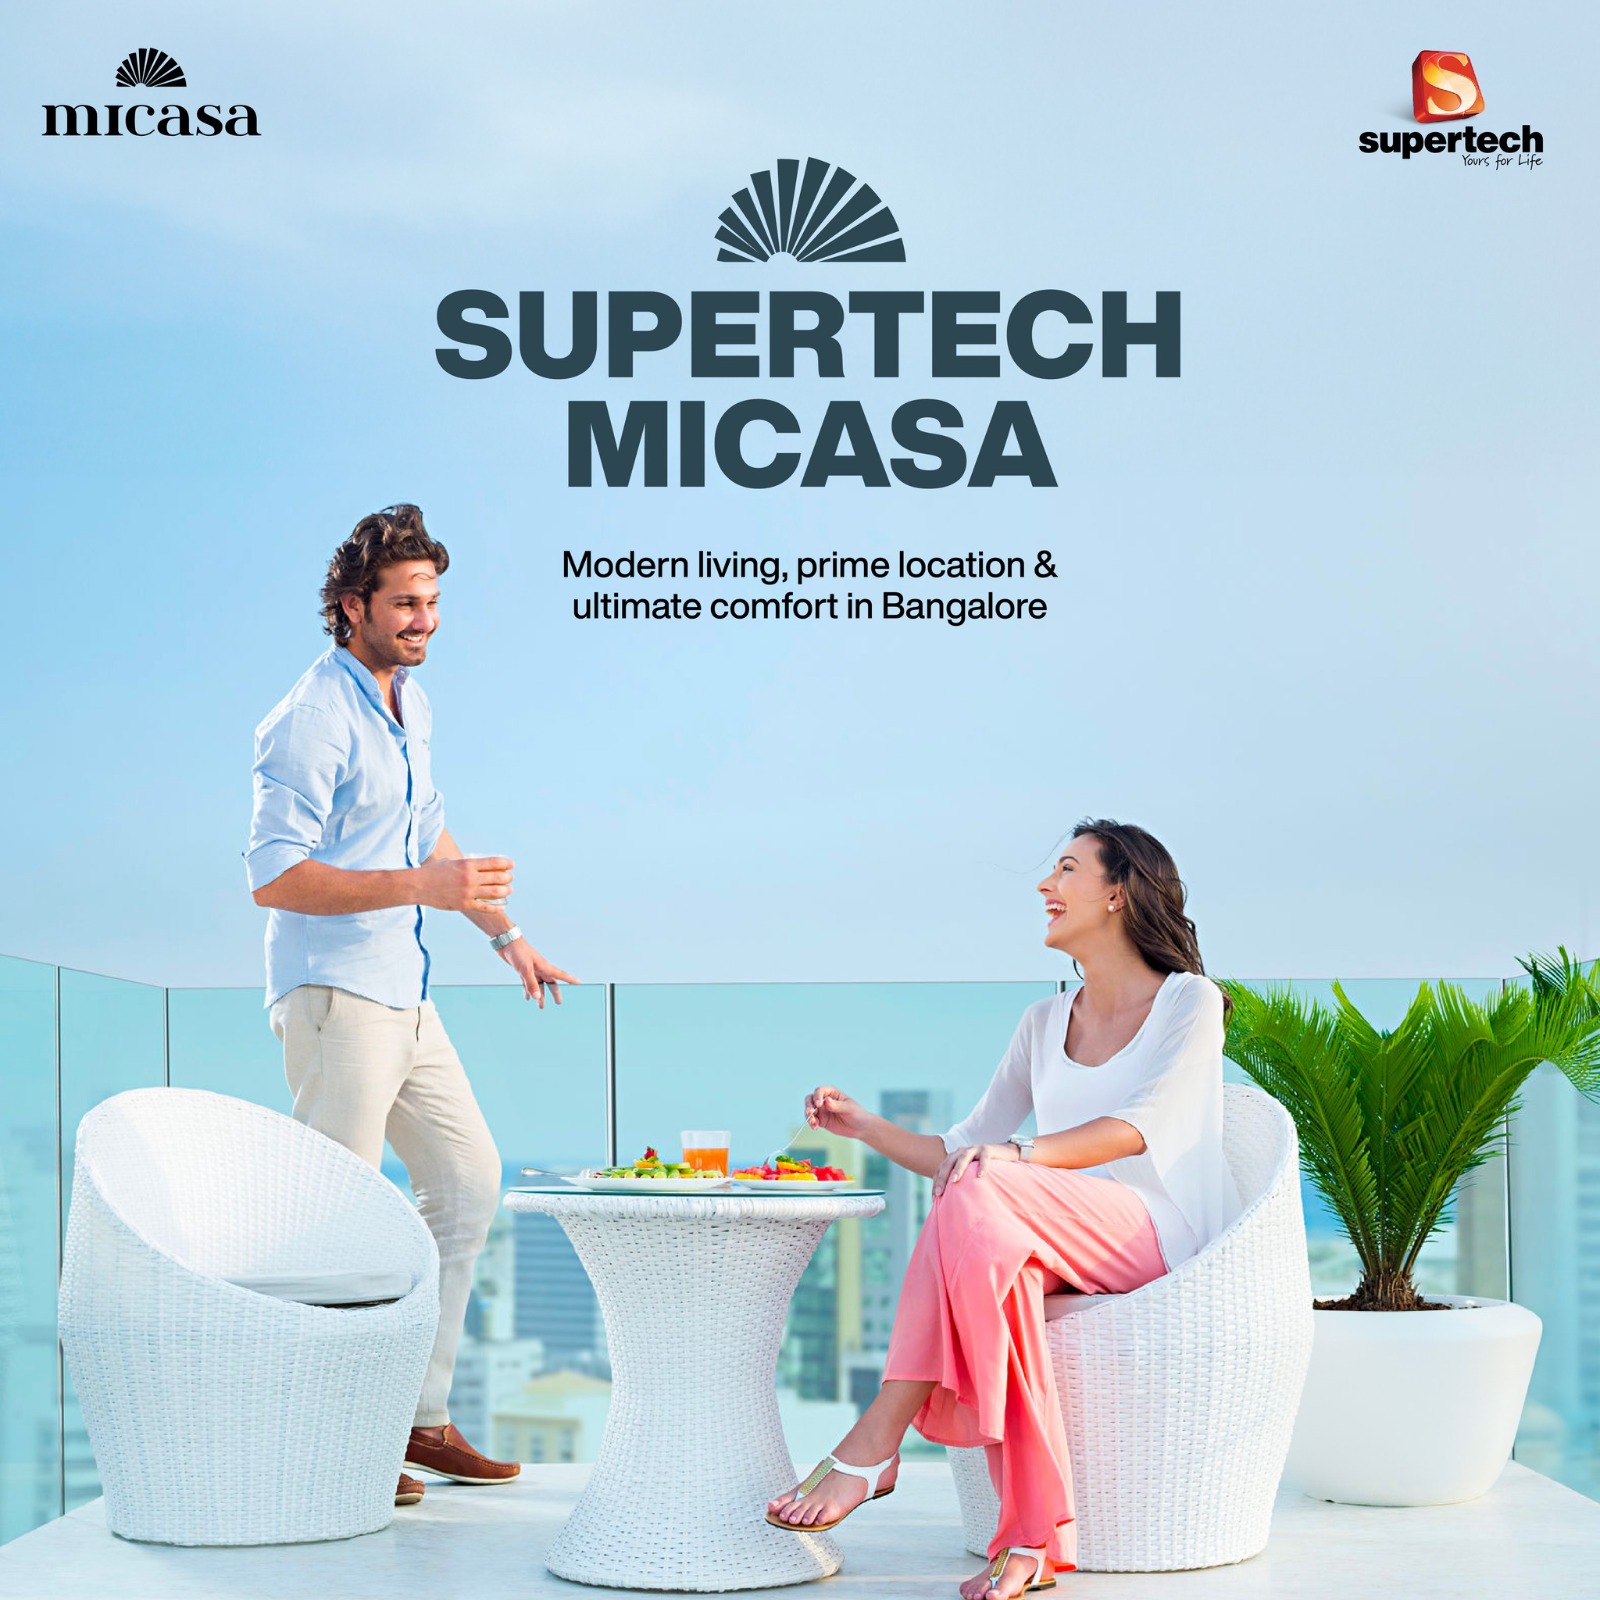 Supertech Micasa: The Epitome of Modern Living in Bangalore's Prime Location Update